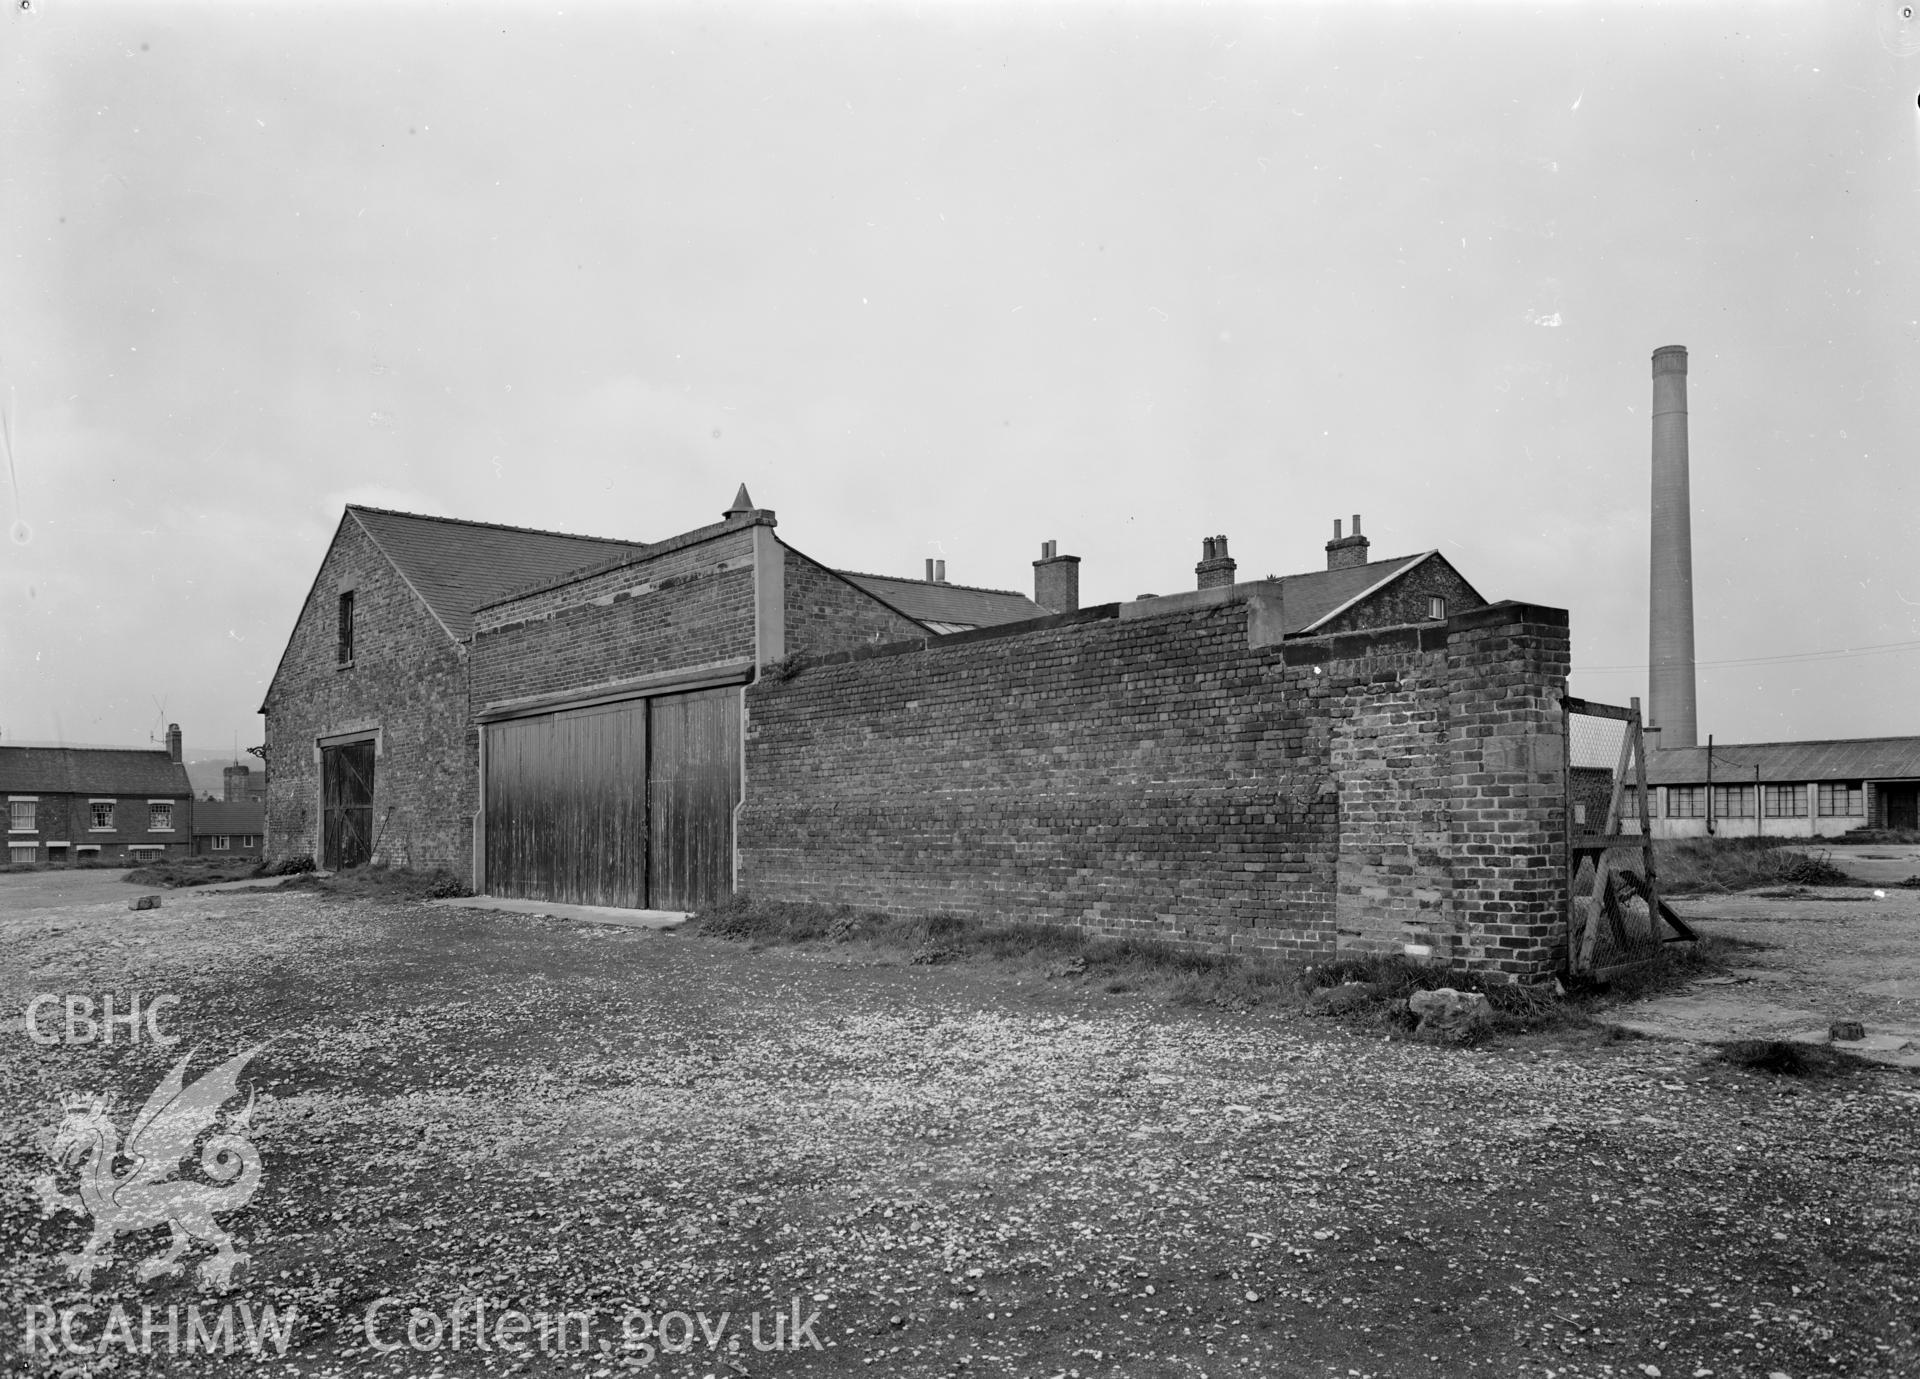 D.O.E photograph of Flint Gaol - south east elevation of drill hall and garages, from east. In castle outer ward (since removed).